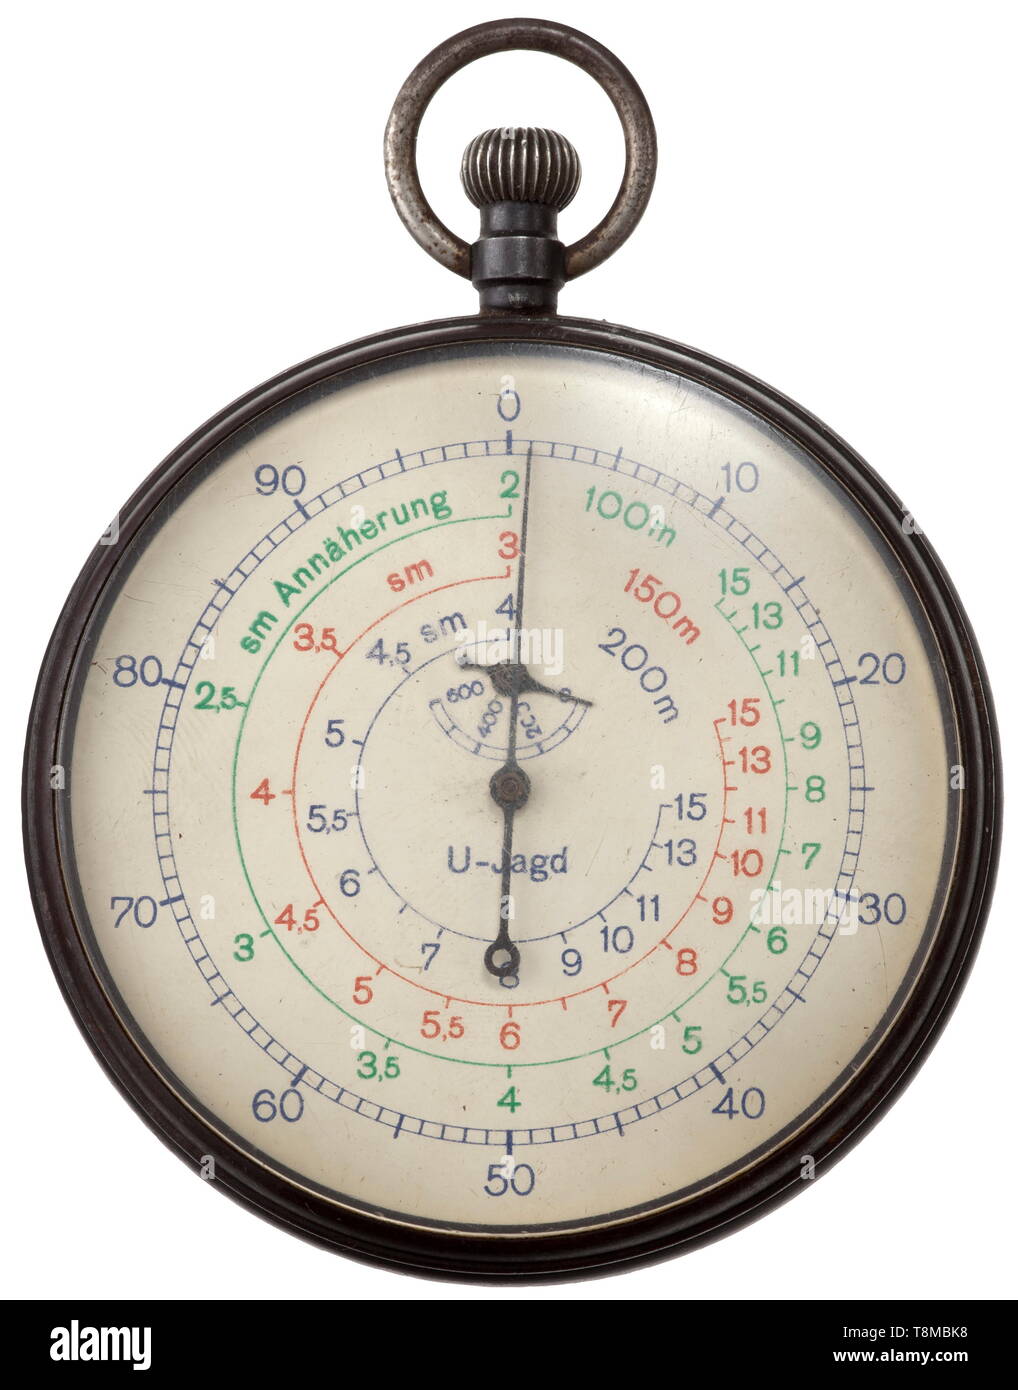 A U-boat stopwatch by Junghans Watch for the estimation of the sink and approach speed of water bombs. Made by Junghans, movement cal. 29c, marked no. '9638U' and '29C'. White face with colour indicators, 1/100-min-scale, three concentric circles with 'sm Annäherung' for 100, 150, 200 meters and small hand with '0, 200, 400, 600' indication. Detachable iron lid at reverse side, engraved with national eagle and letters 'KM'. Diameter 70 mm, watch not in functioning order, in need of overhaul. Cf. Knirim, Militäruhren, p. 252. Rare piece of equipment of the German submarine w, Editorial-Use-Only Stock Photo